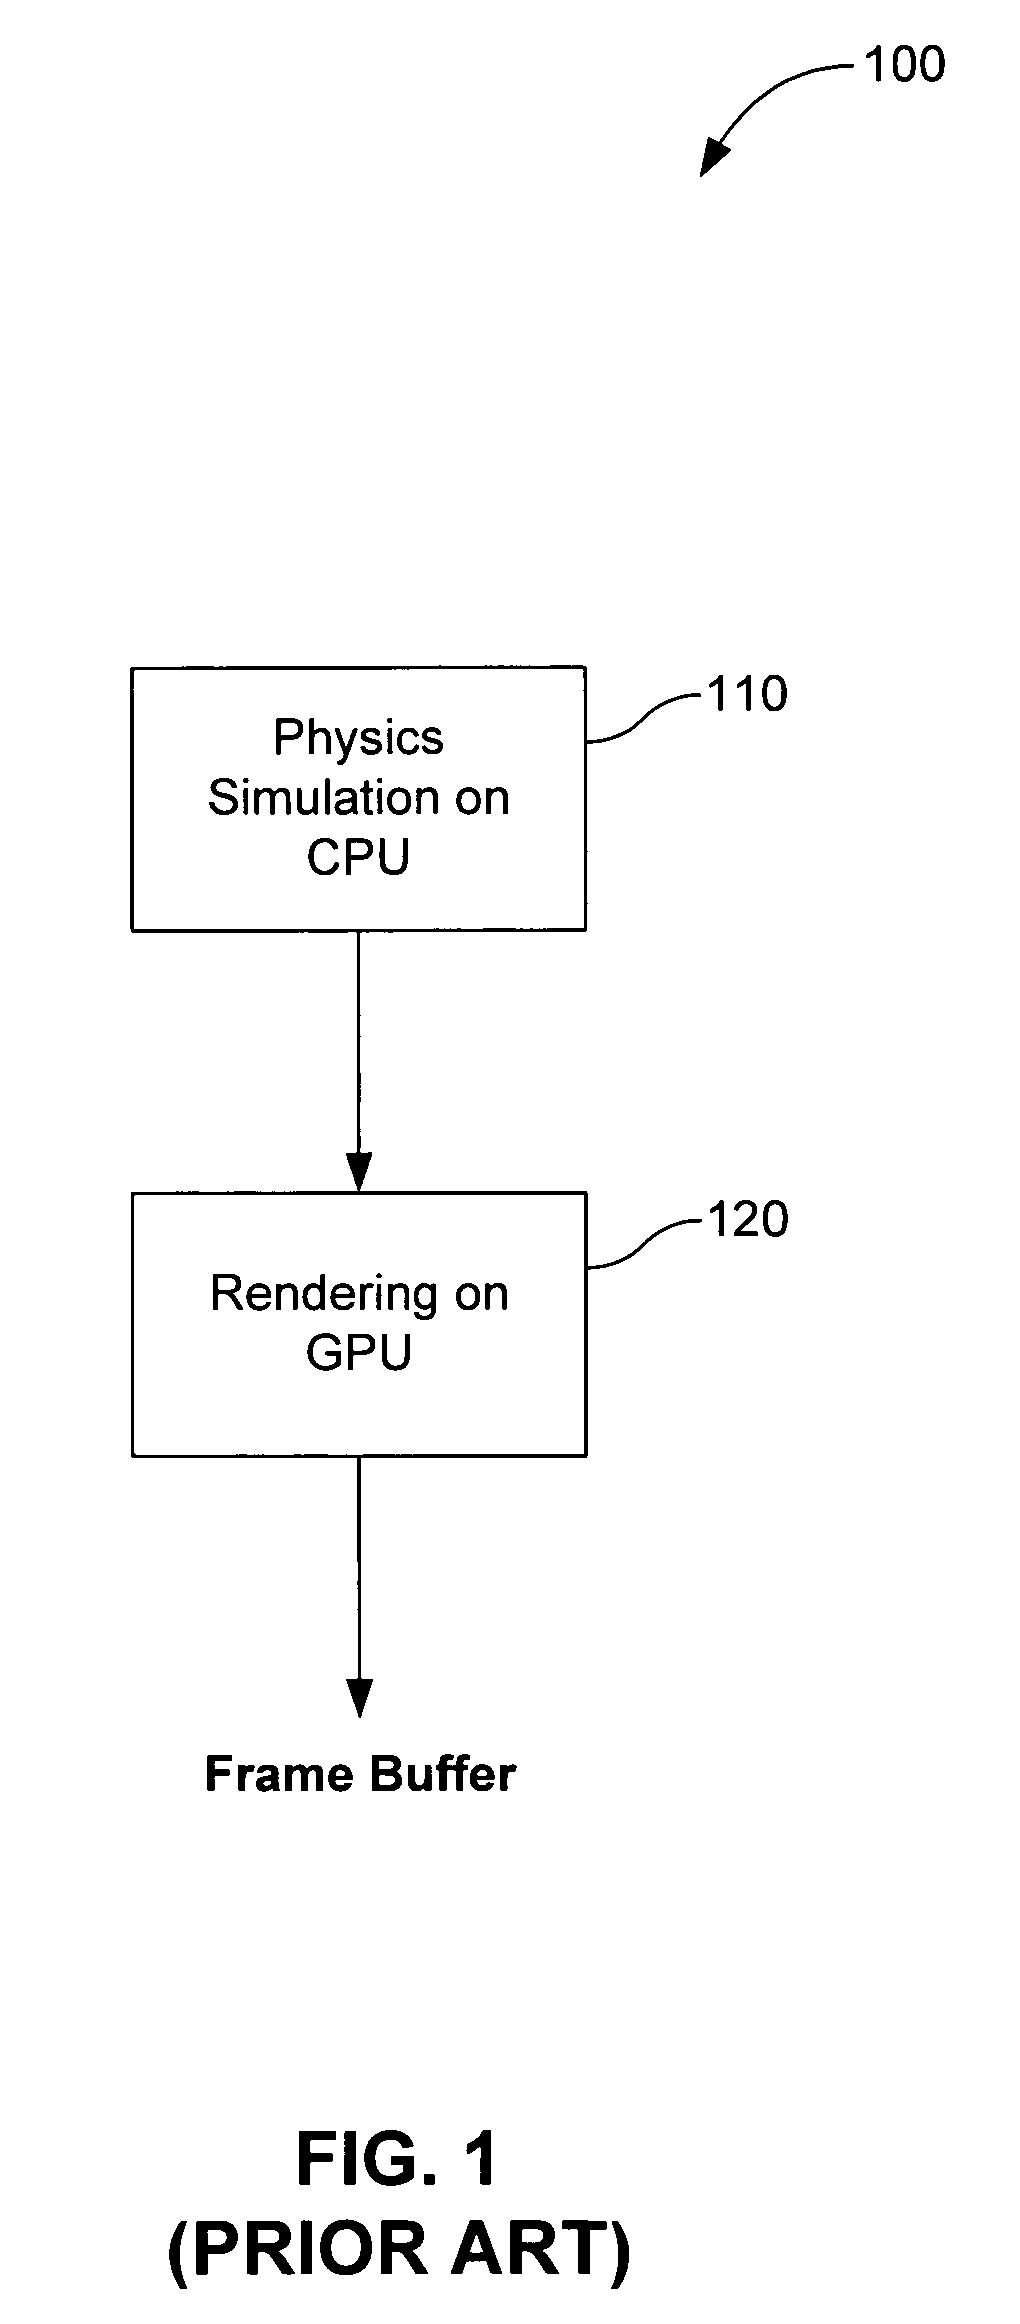 Physical simulations on a graphics processor